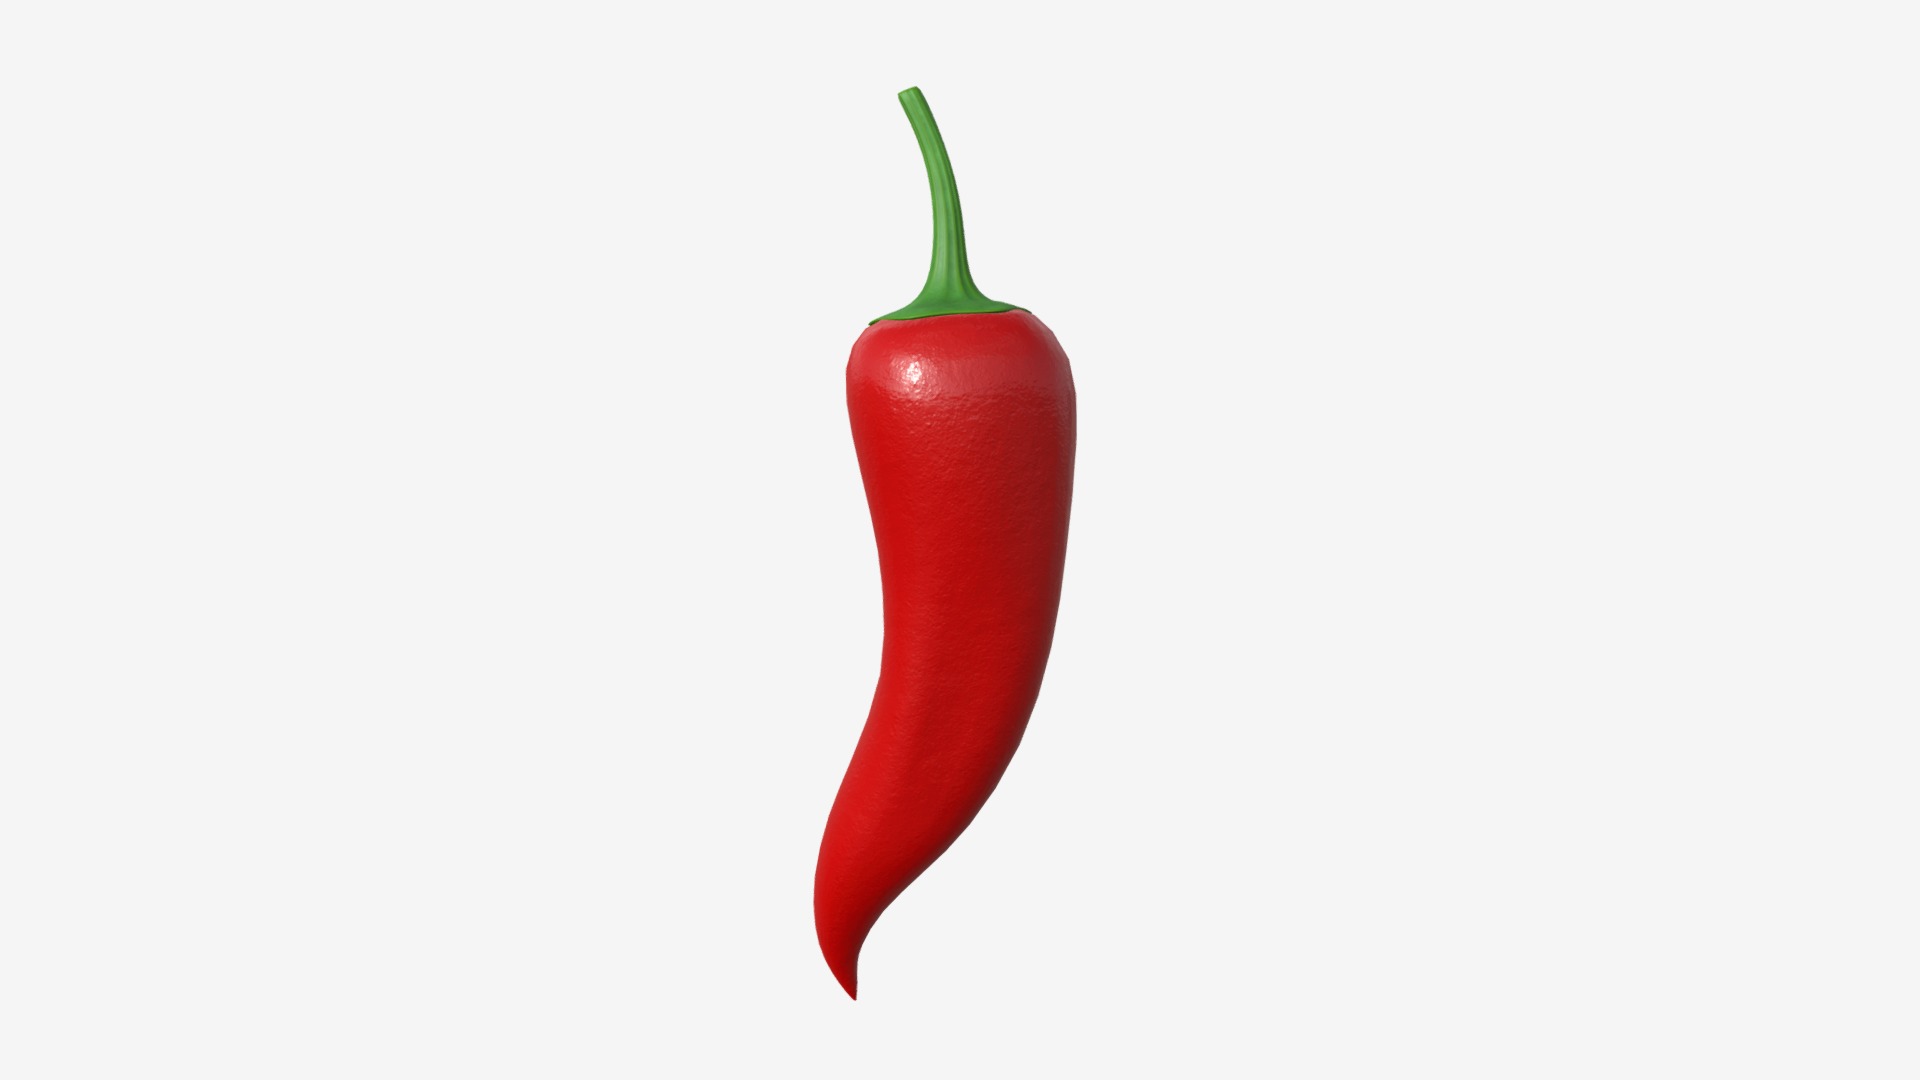 3D model chilli pepper - This is a 3D model of the chilli pepper. The 3D model is about a red pepper with a green stem.